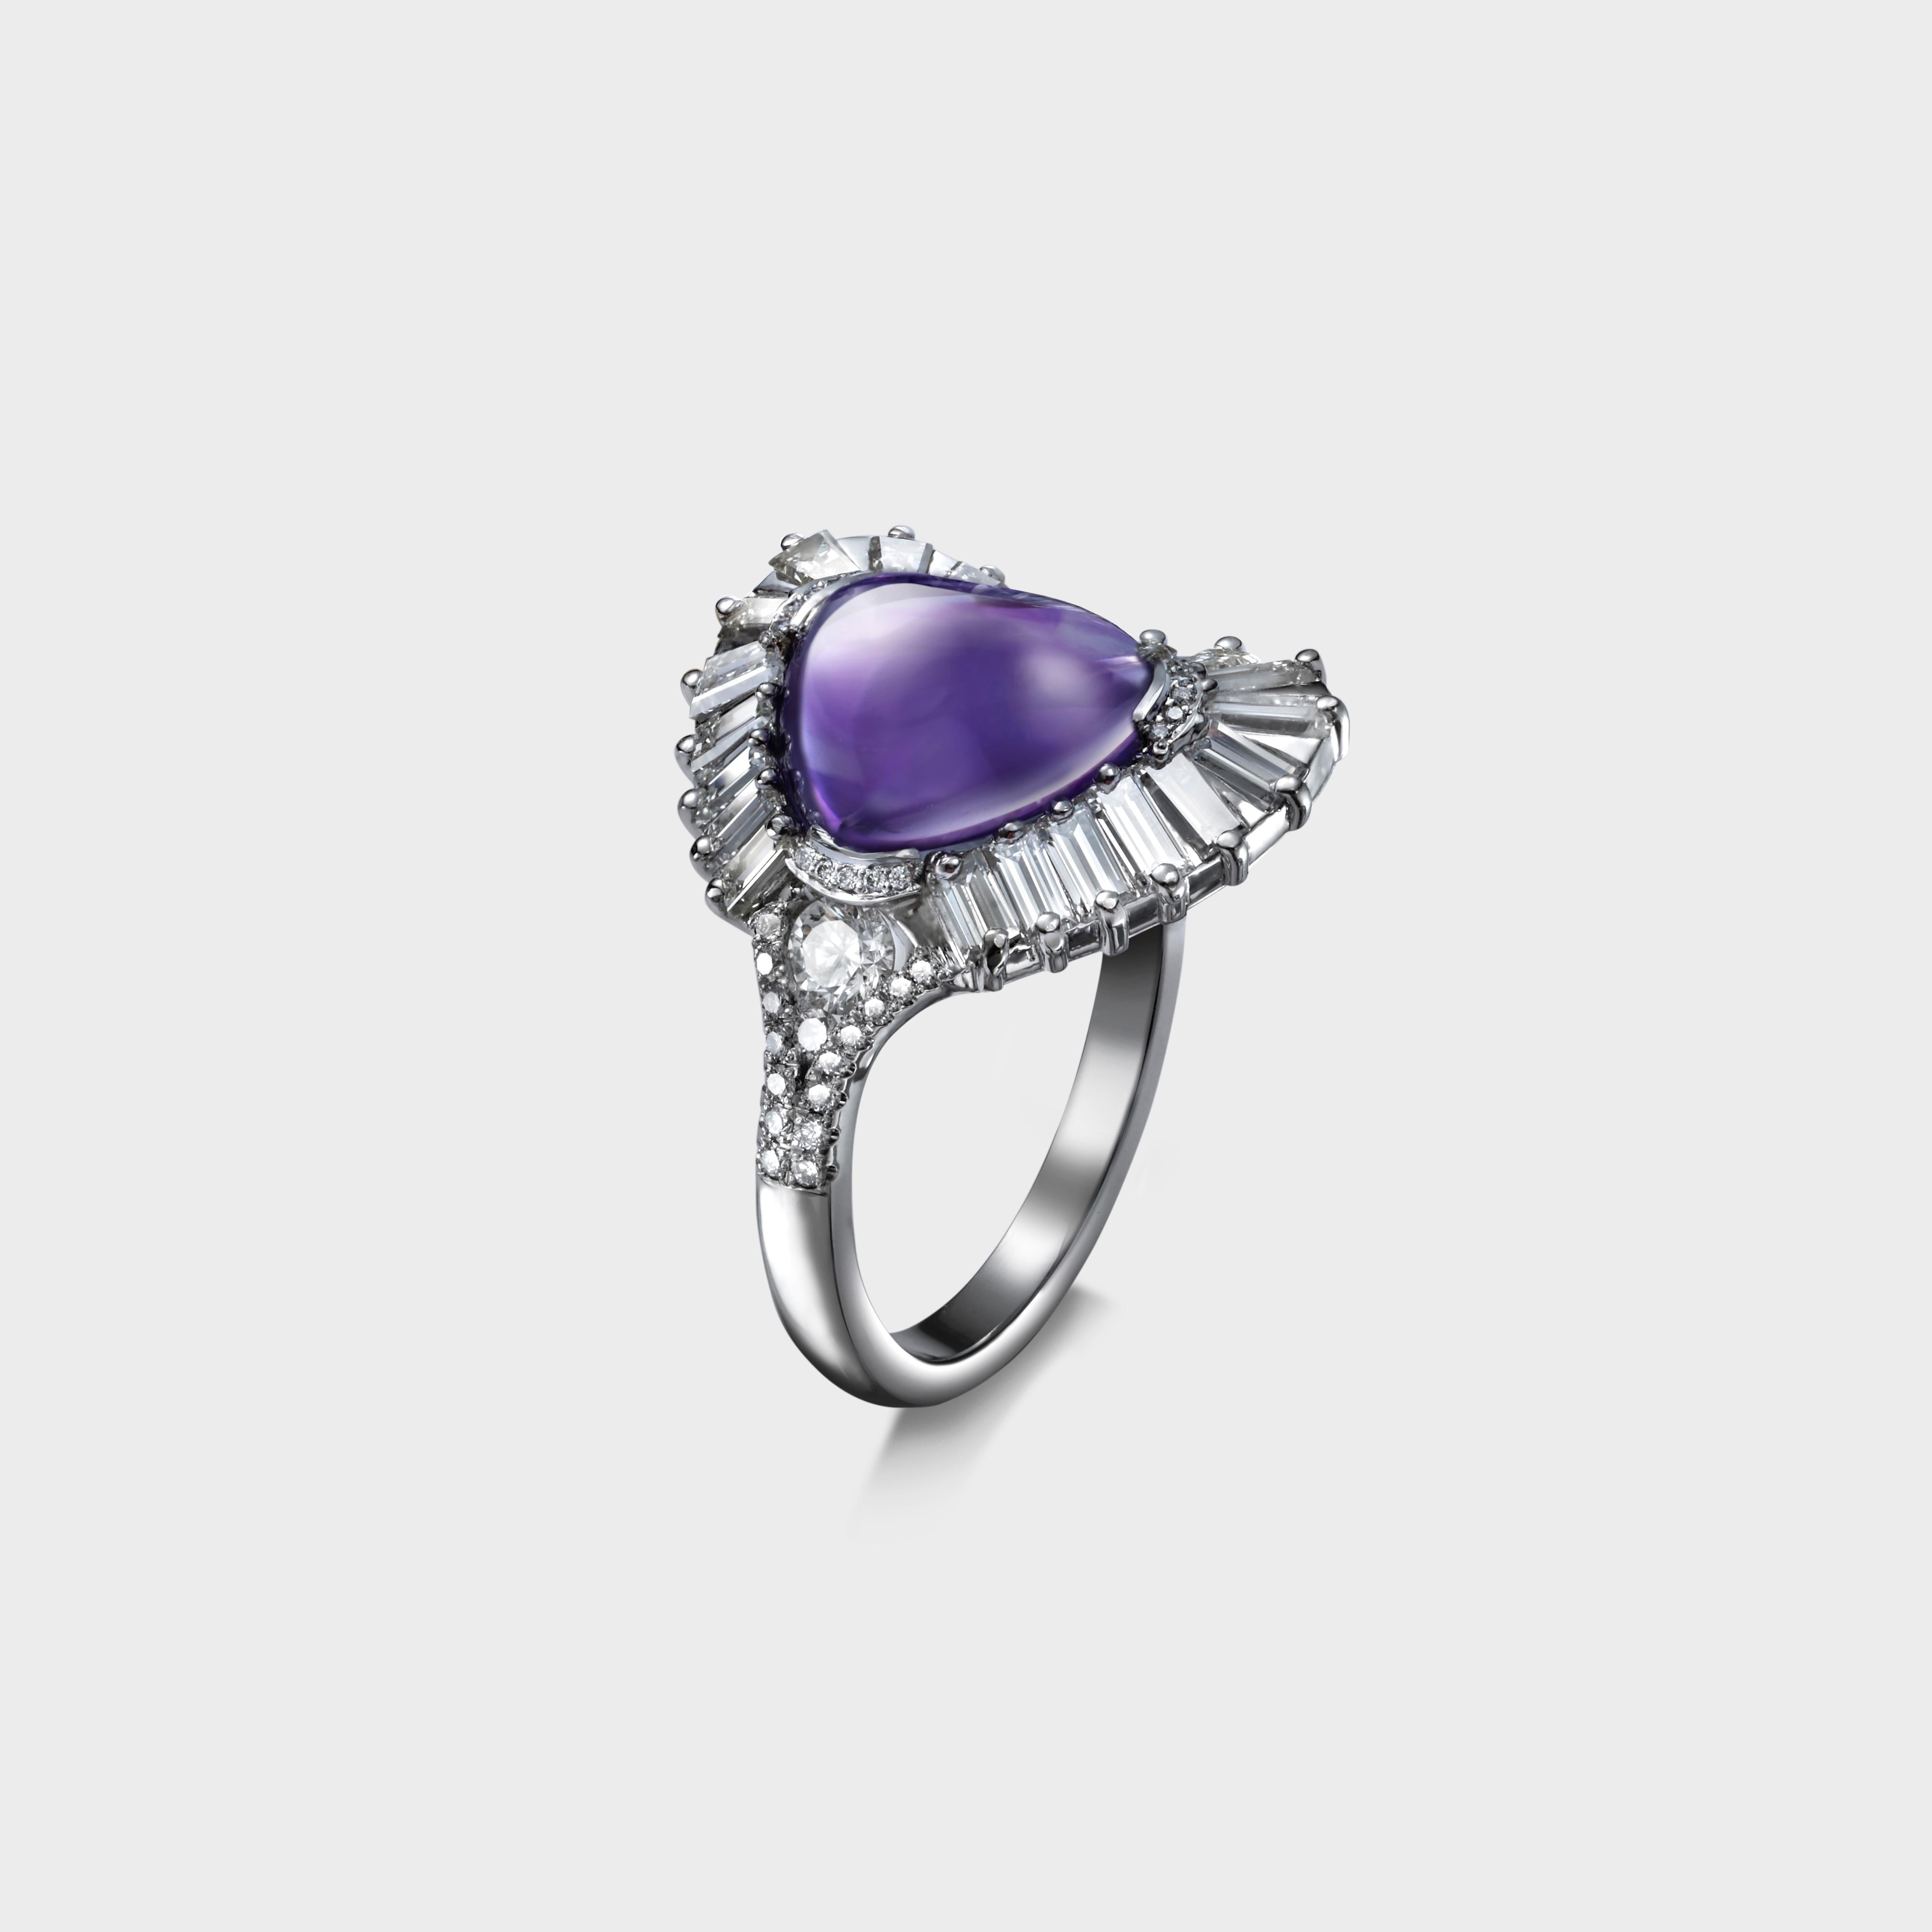 A unique design with flowing lines. A 10.5 x 9.5 mm loaf cut purple amethyst at the centre surrounded with 21  baguette diamonds weighing 1.55 Carats.  The semi rub-over claws that hold the amethyst are delicately set with 0.8 mm diamonds. One side